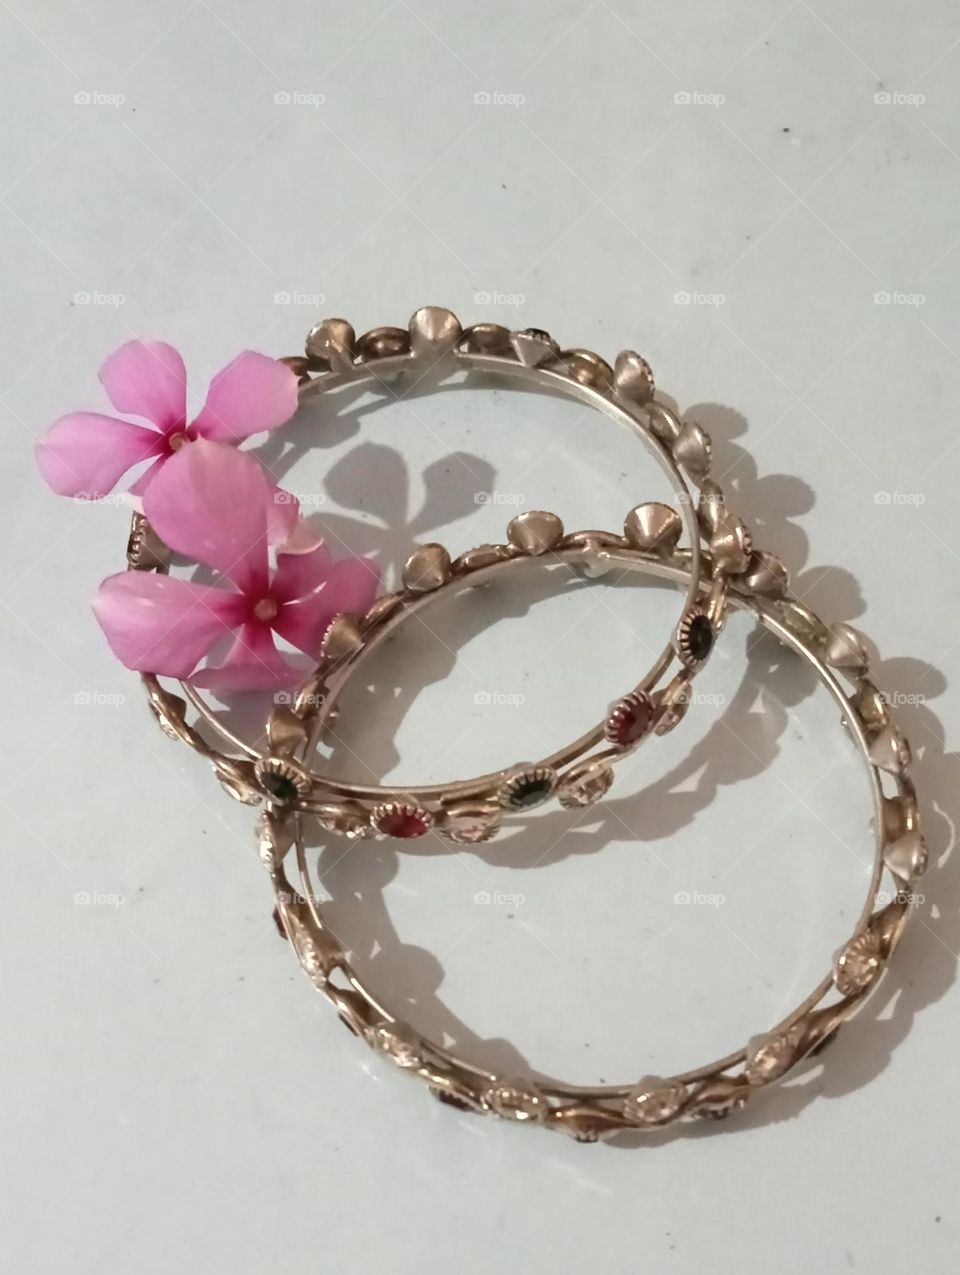 Bangles Is In Geometry Shapes Circle. 🔴⭕ Beautiful 🥰❤️ Bangles decorated with beautiful pink coloured flowers.